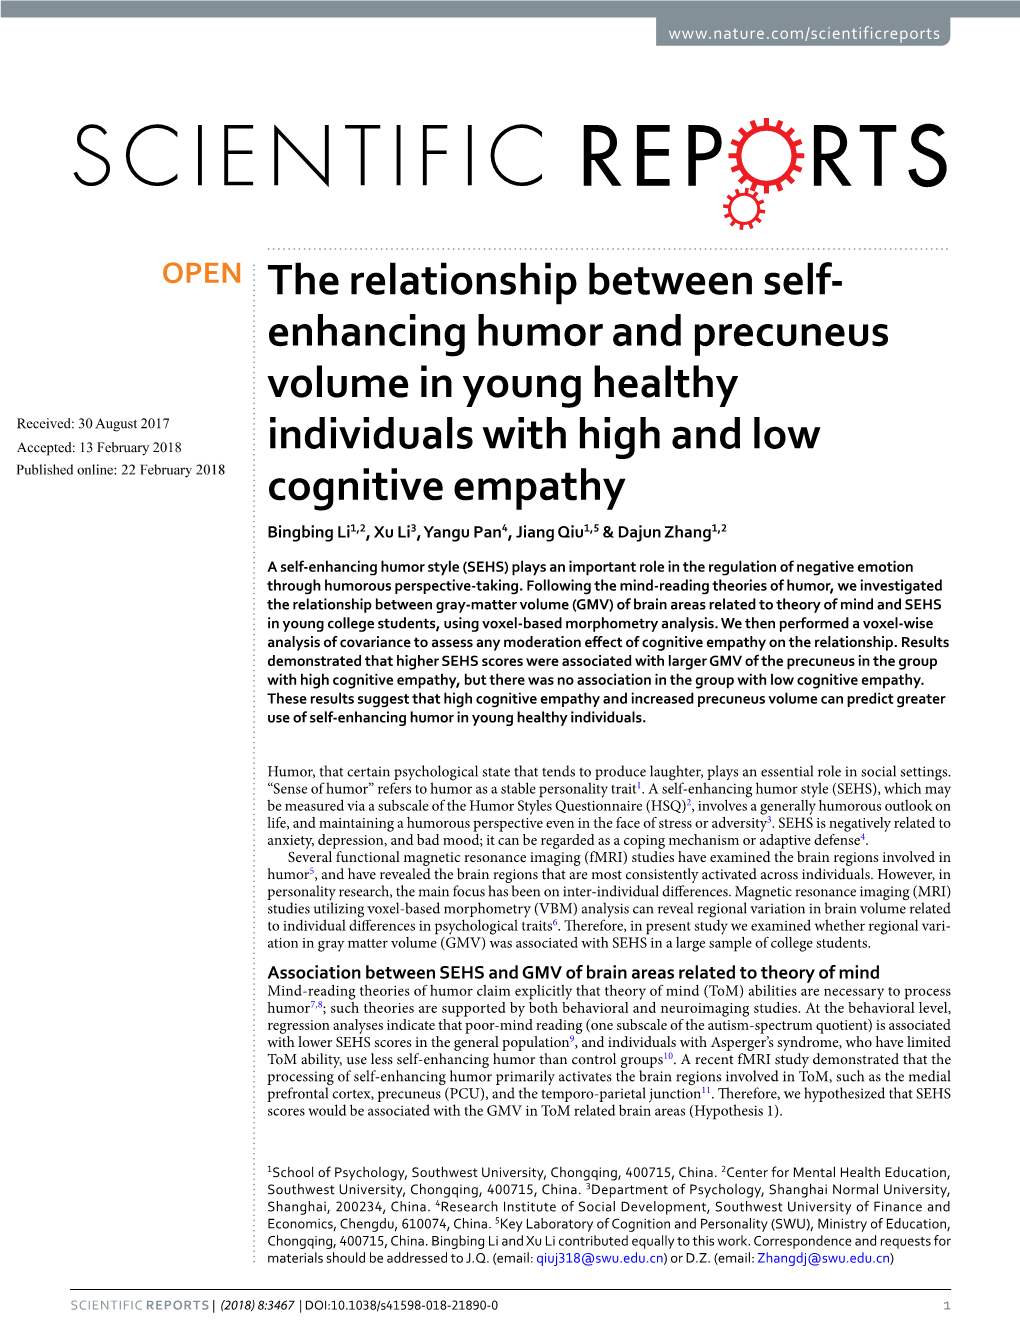 The Relationship Between Self-Enhancing Humor And